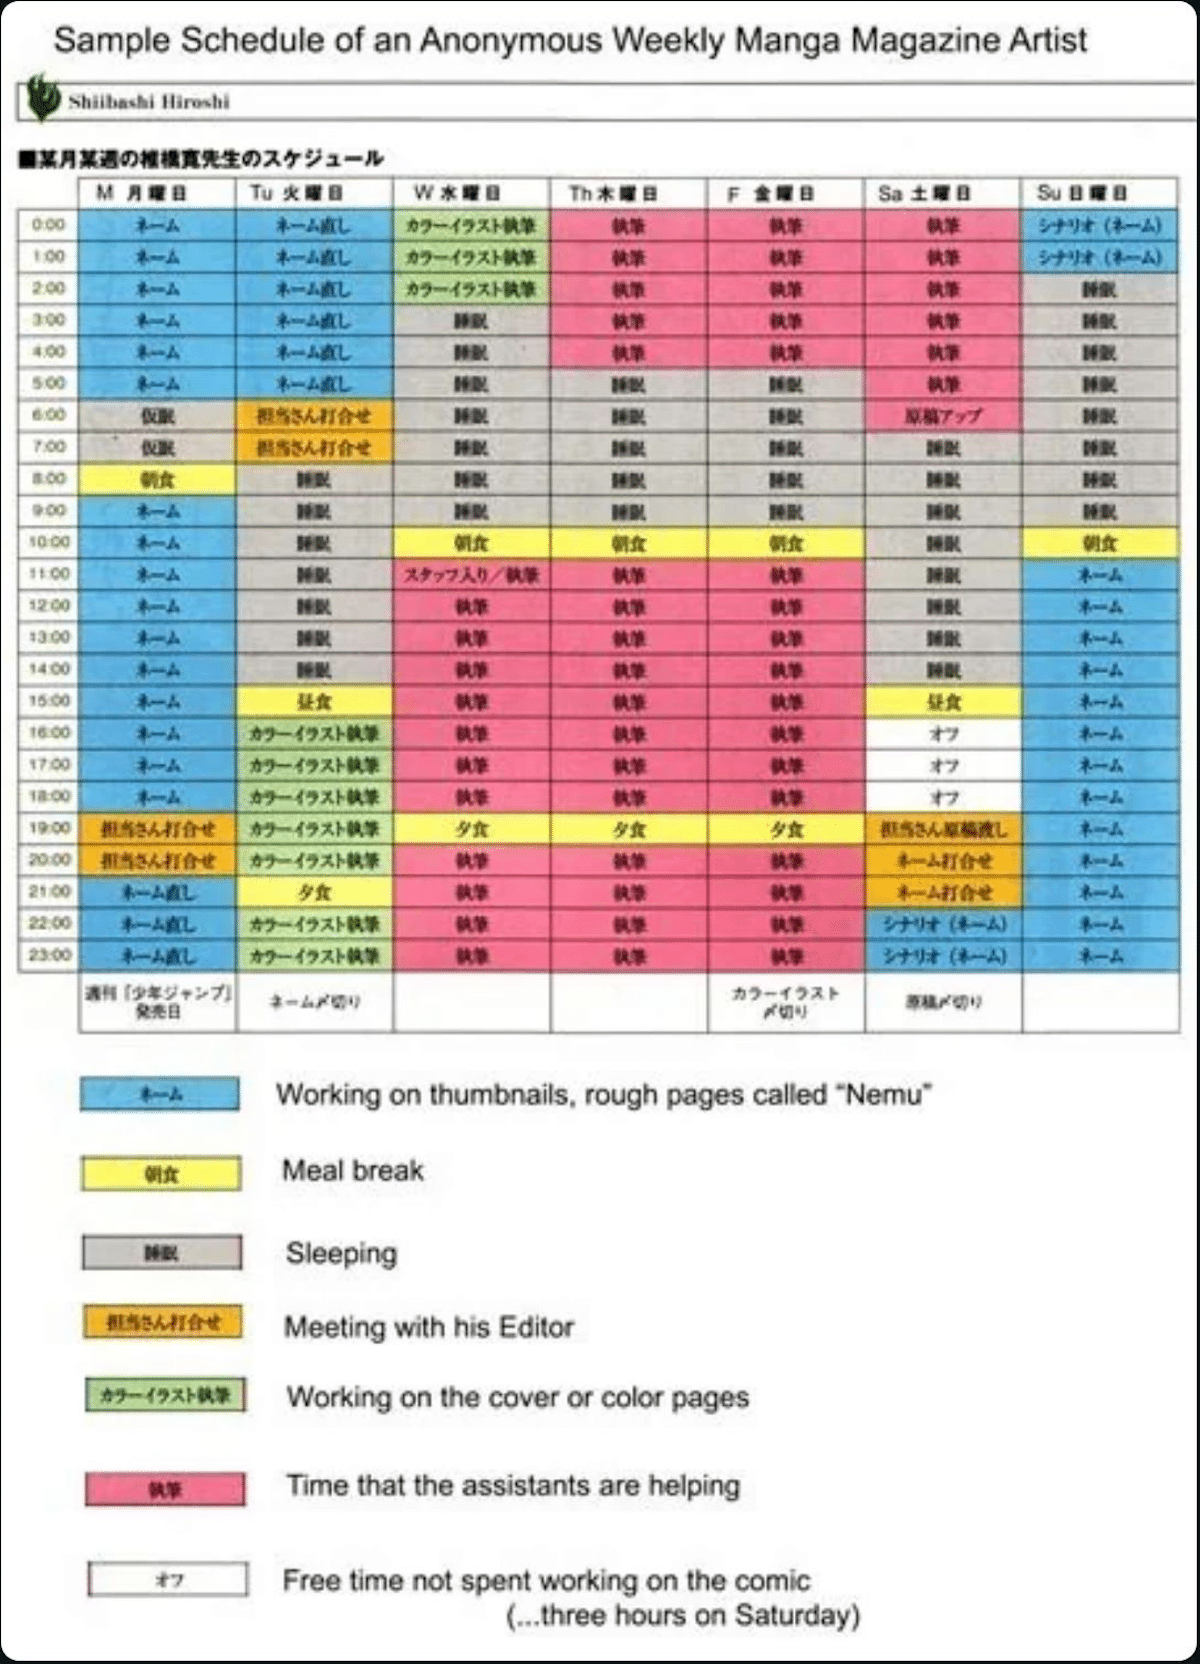 A spreadsheet noting the production schedule for a weekly manga